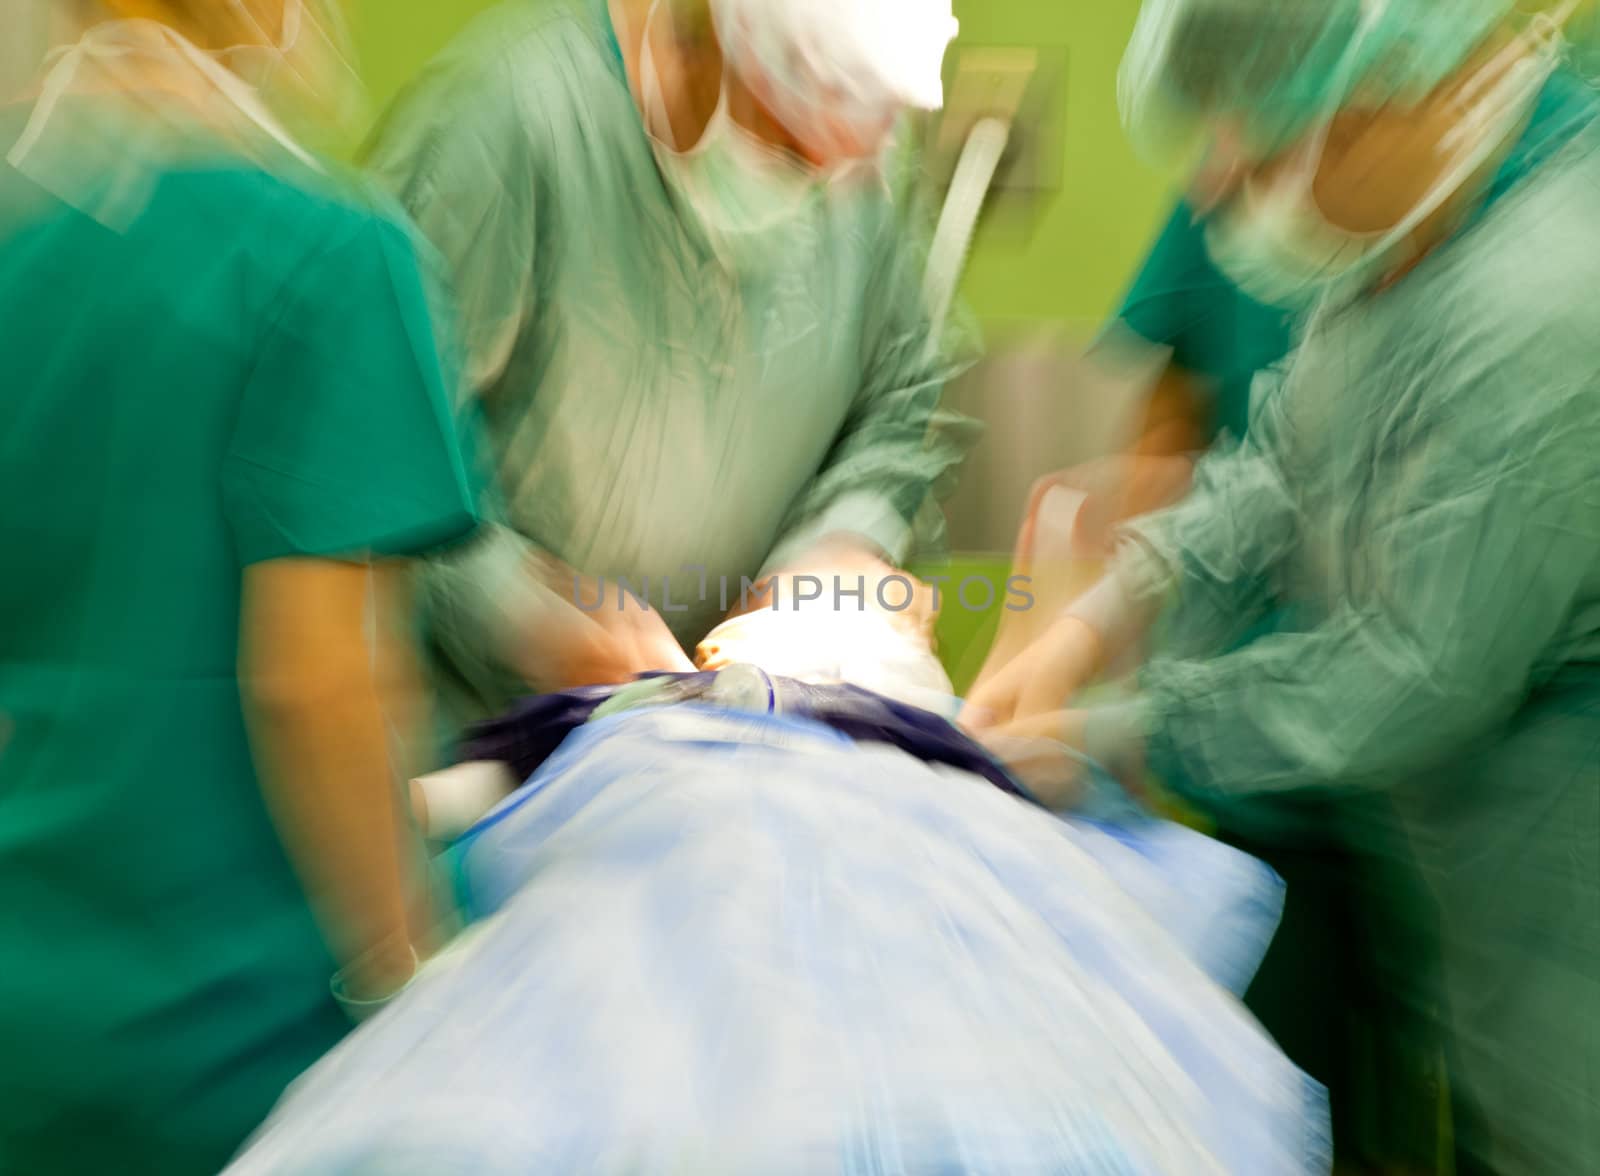 Blurred figures of surgeonts in medical uniforms performing surgery